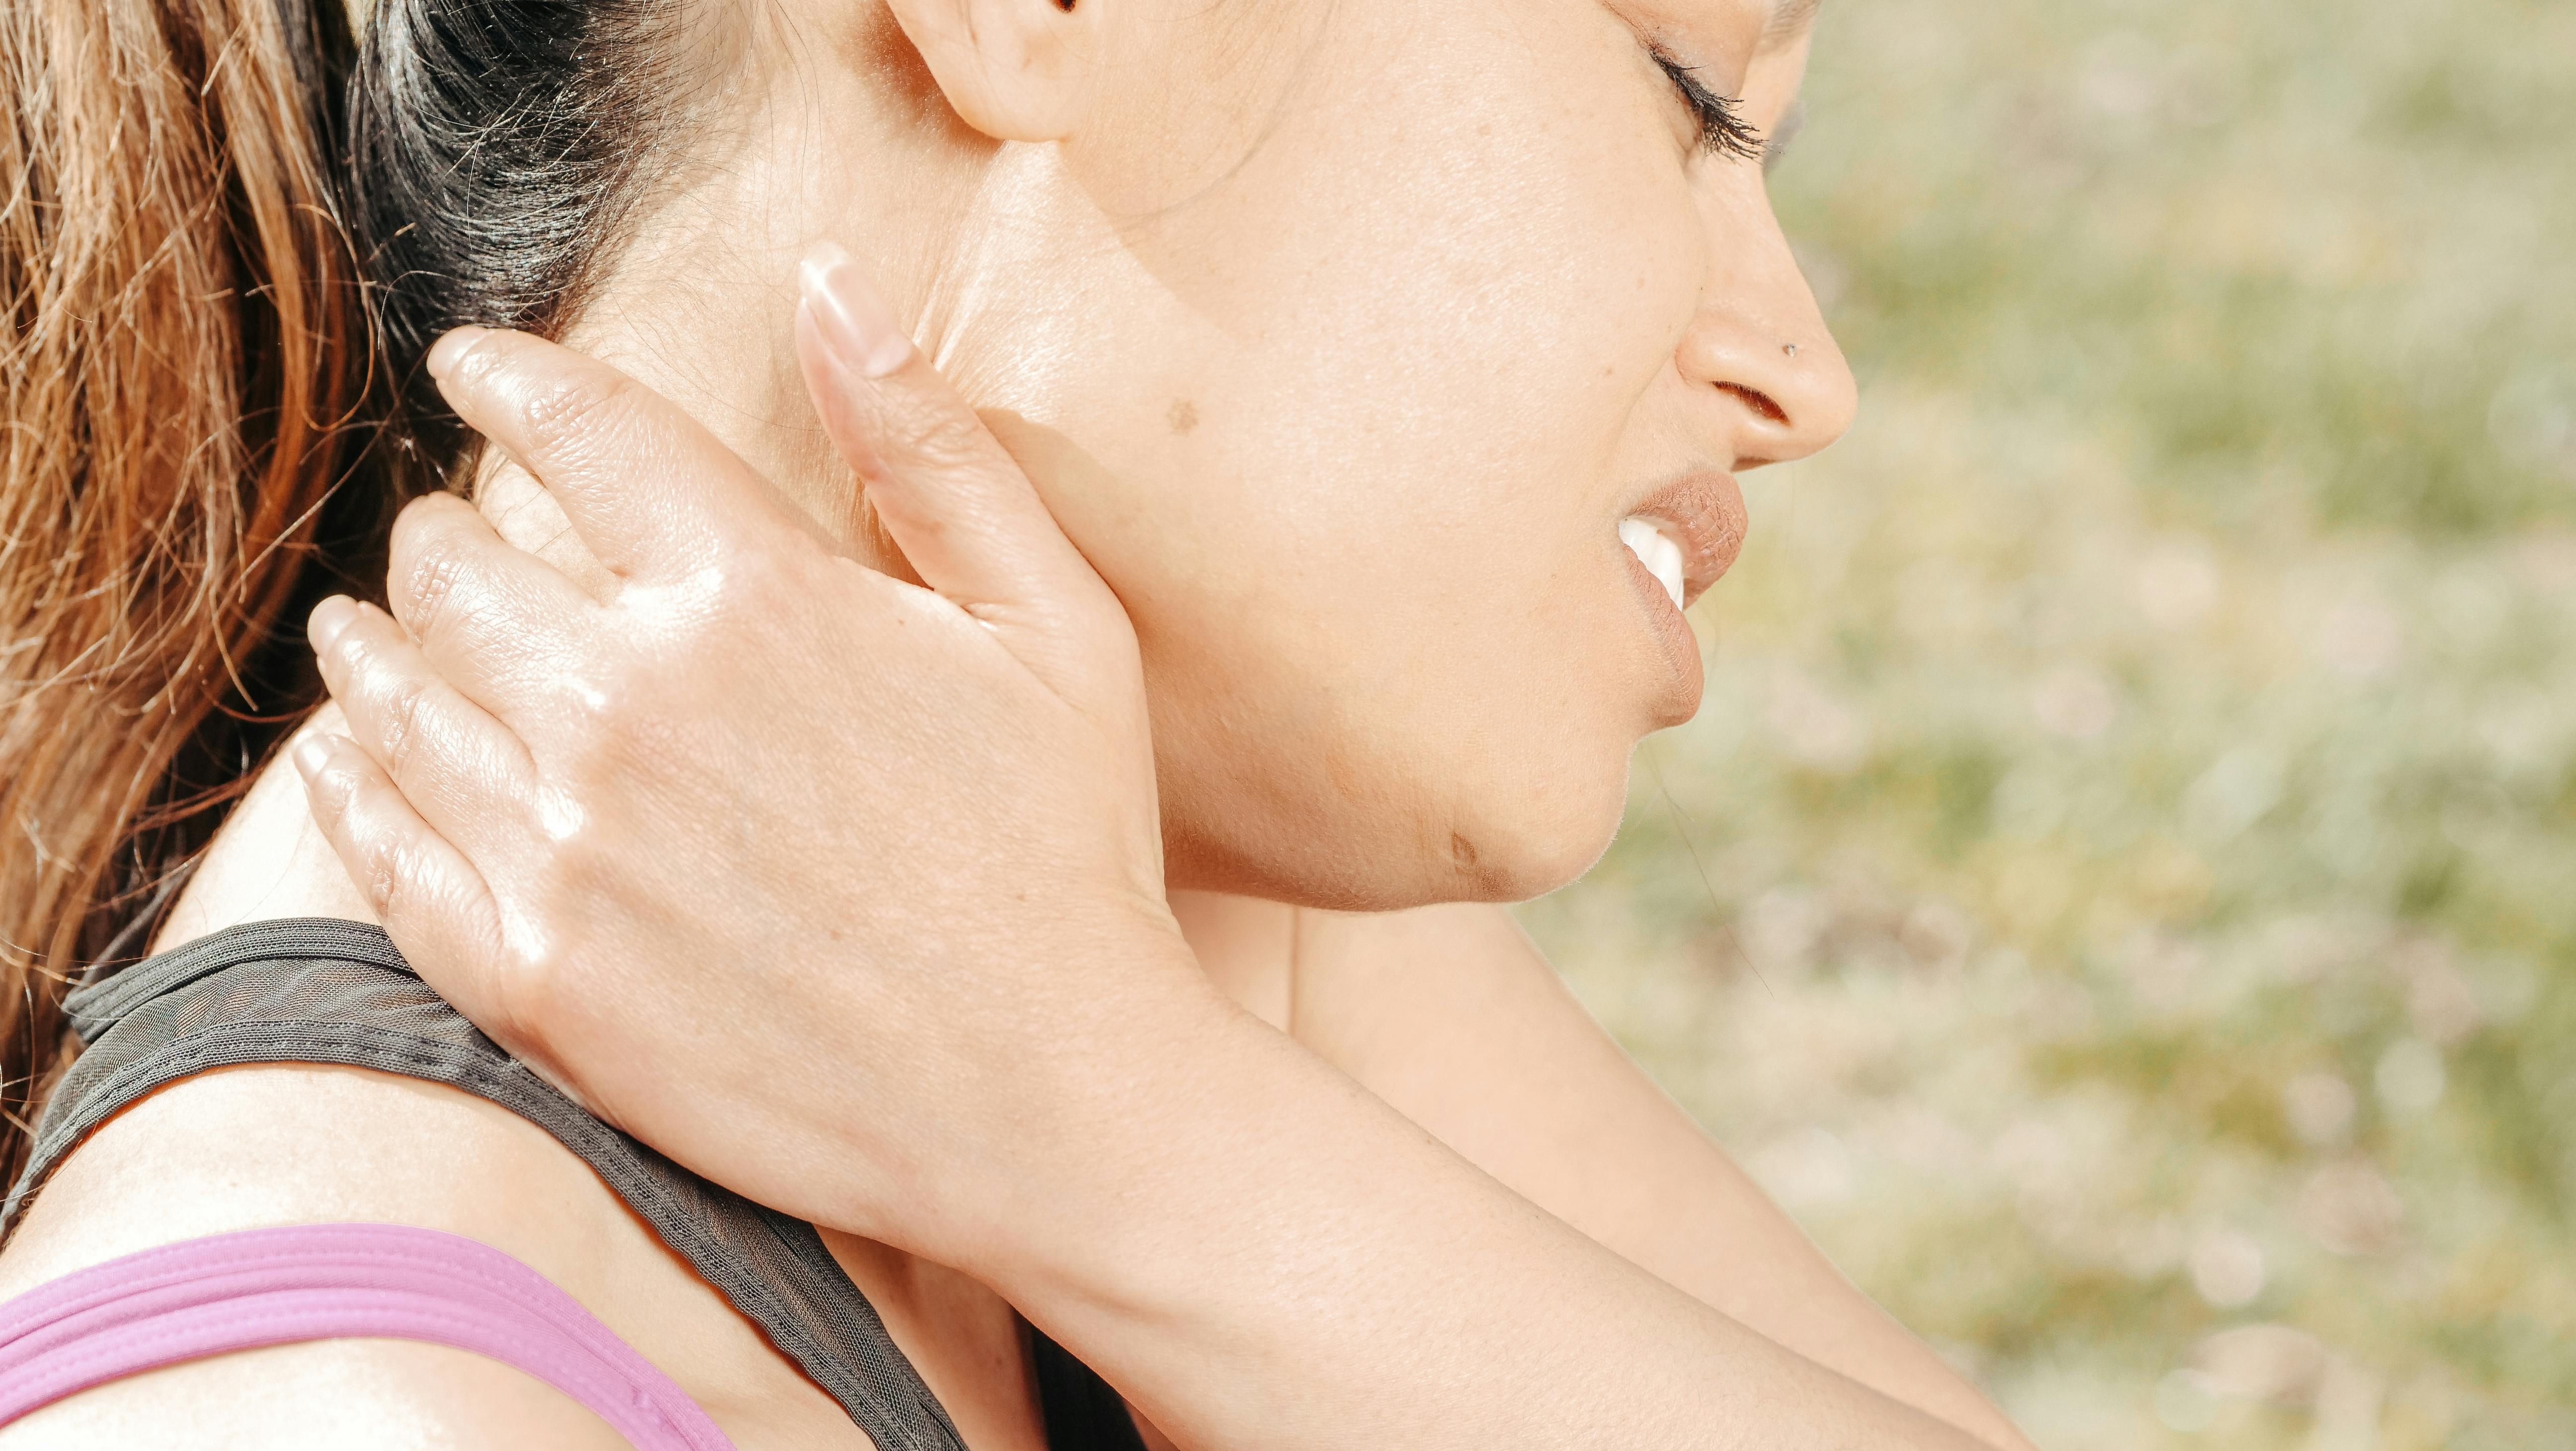 A woman with an injured neck | Source: Pexels